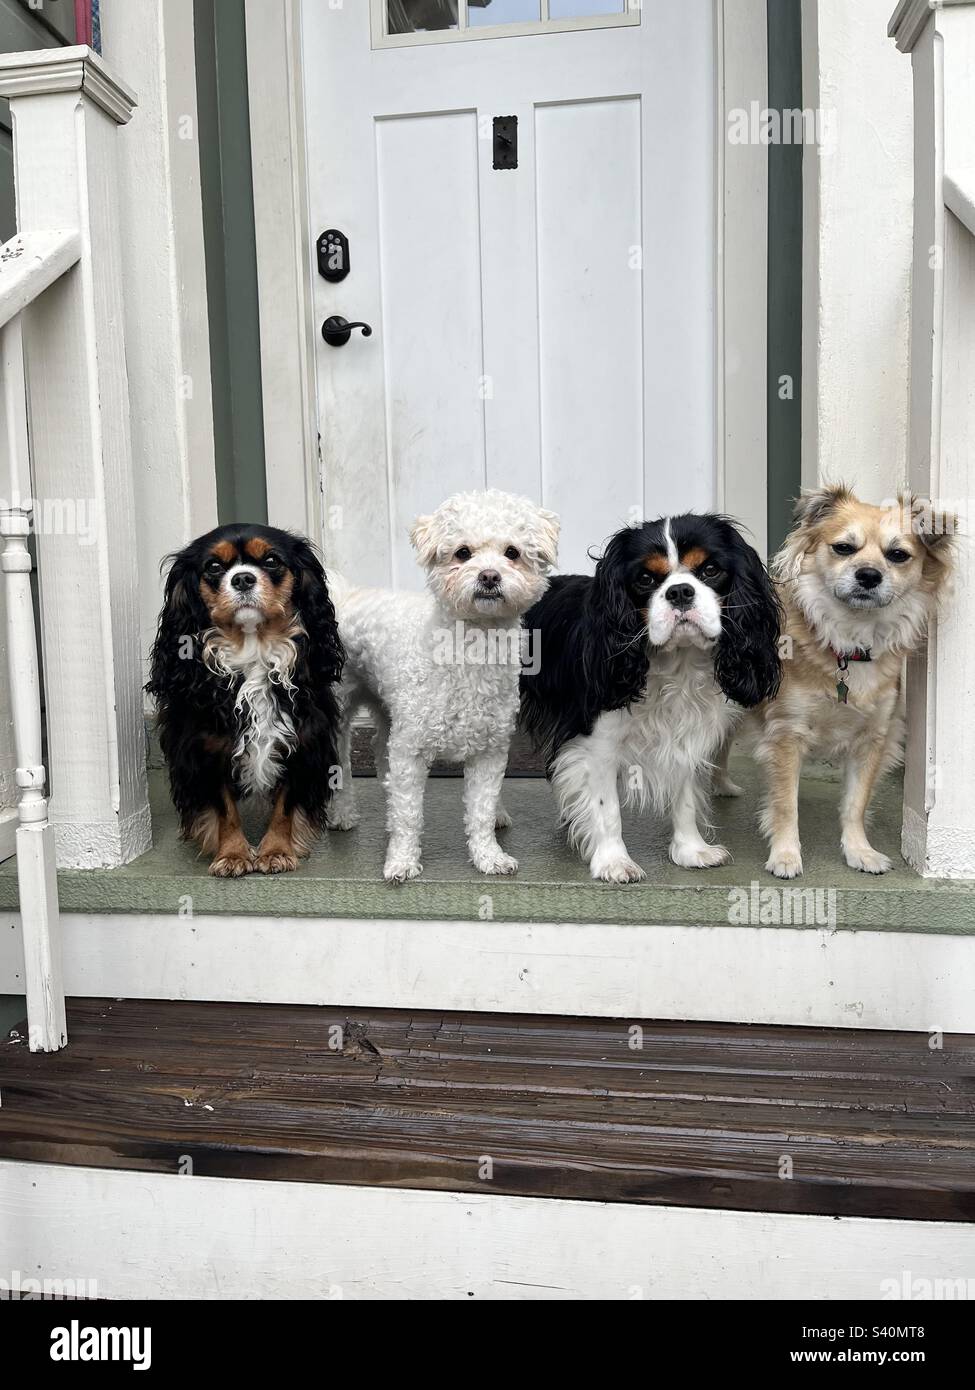 Four small dogs all together on a front stoop Stock Photo